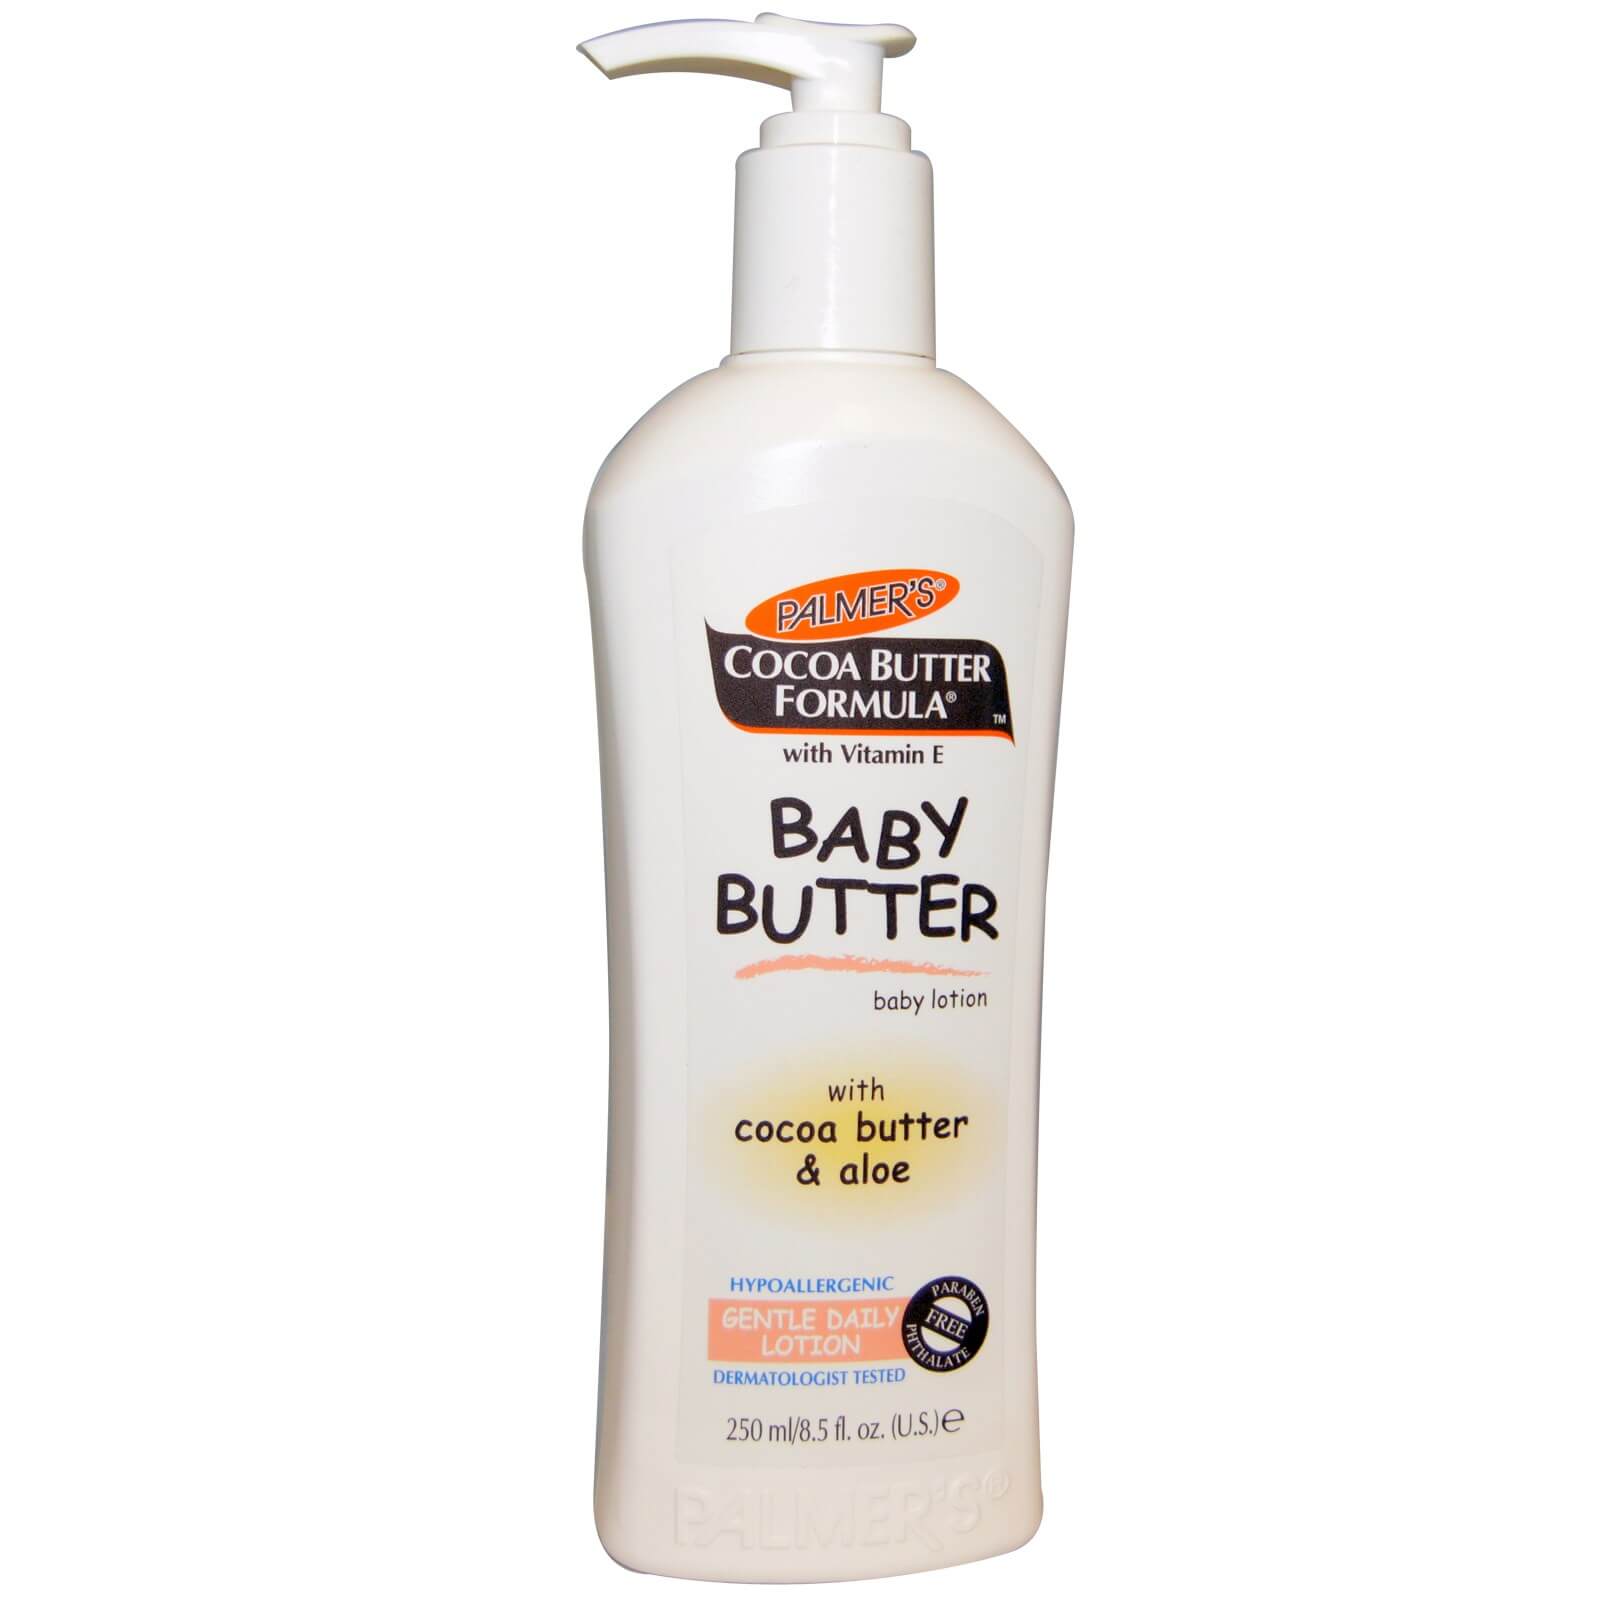 Palmers Cocoa Butter Formula Baby Butter Lotion 250Ml